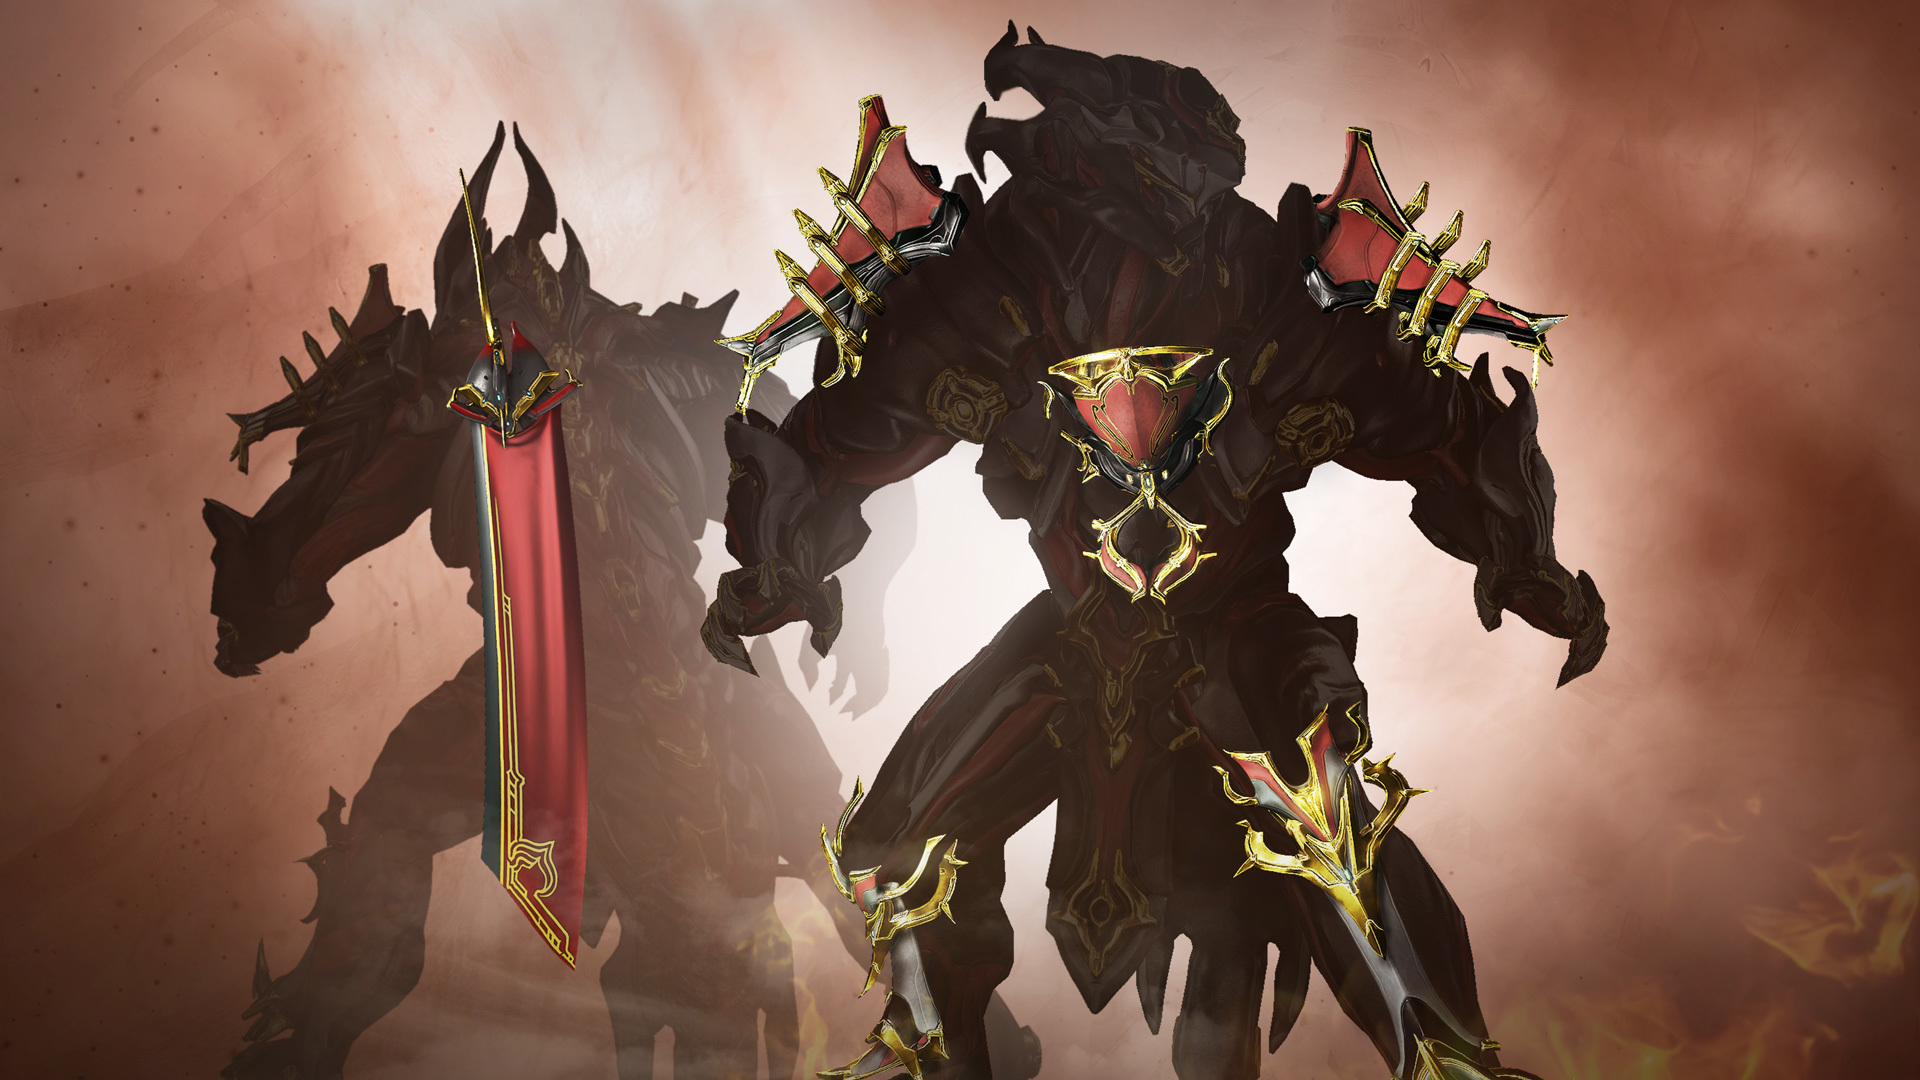 Digital Extremes - DOMINATE THE BATTLEFIELD WITH KHORA PRIME ACCESS